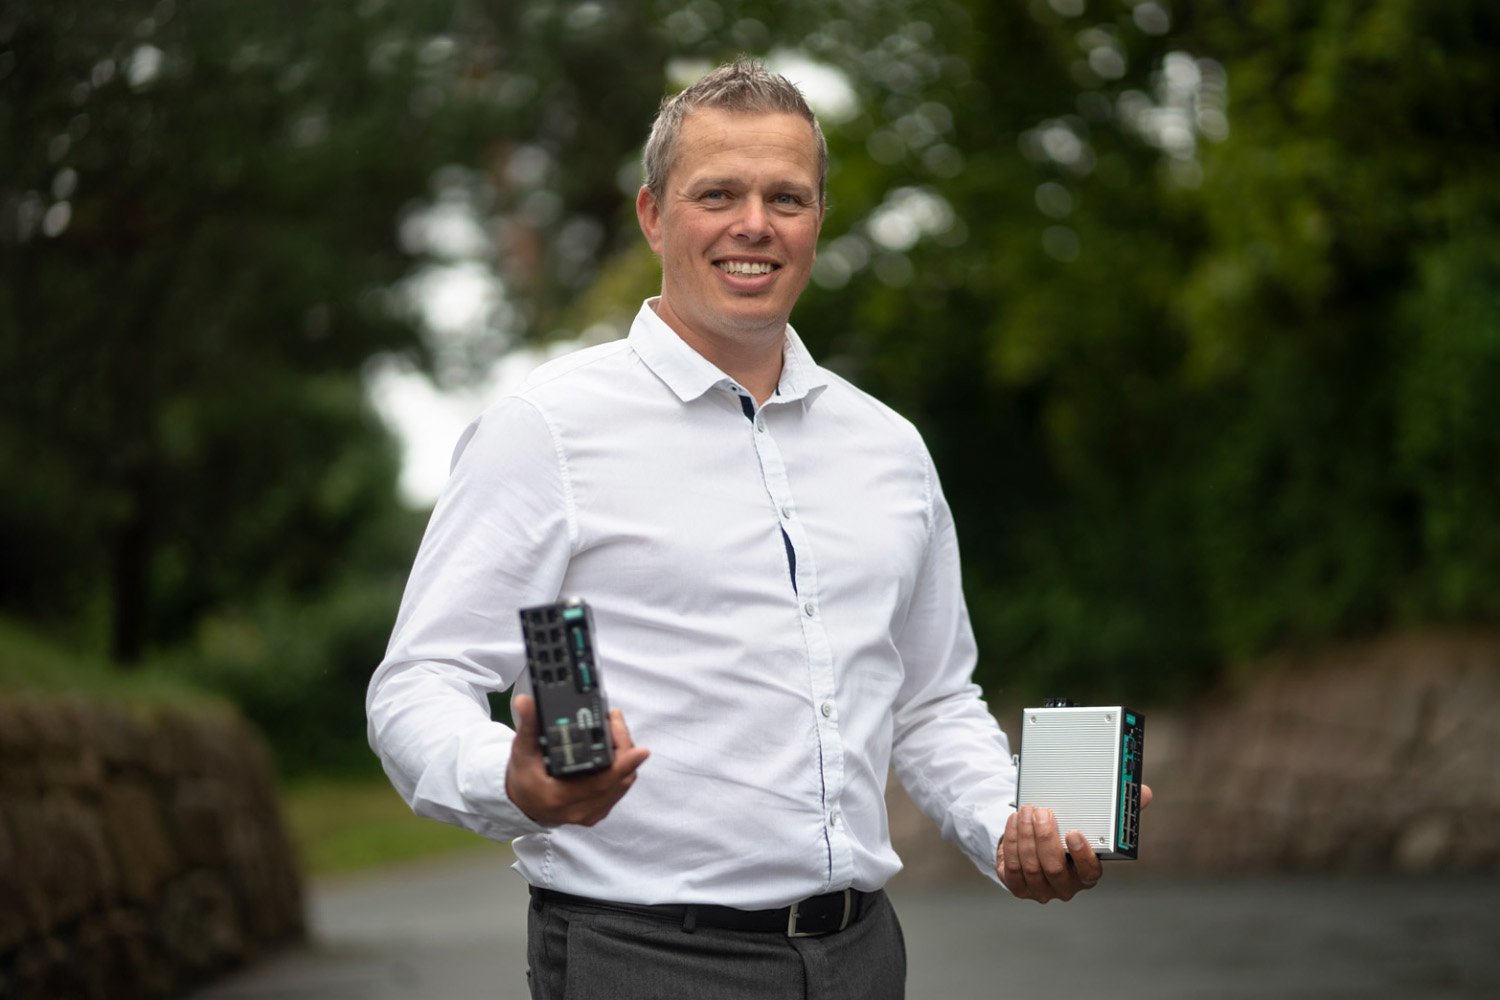 The picture shows Mr. Gøran Labrå, Business development director at Hatteland Technology, holding two Moxa switches, one of which is the EDS-G4000 series. He is wearing a white shirt and is smiling. There are green trees in the background.